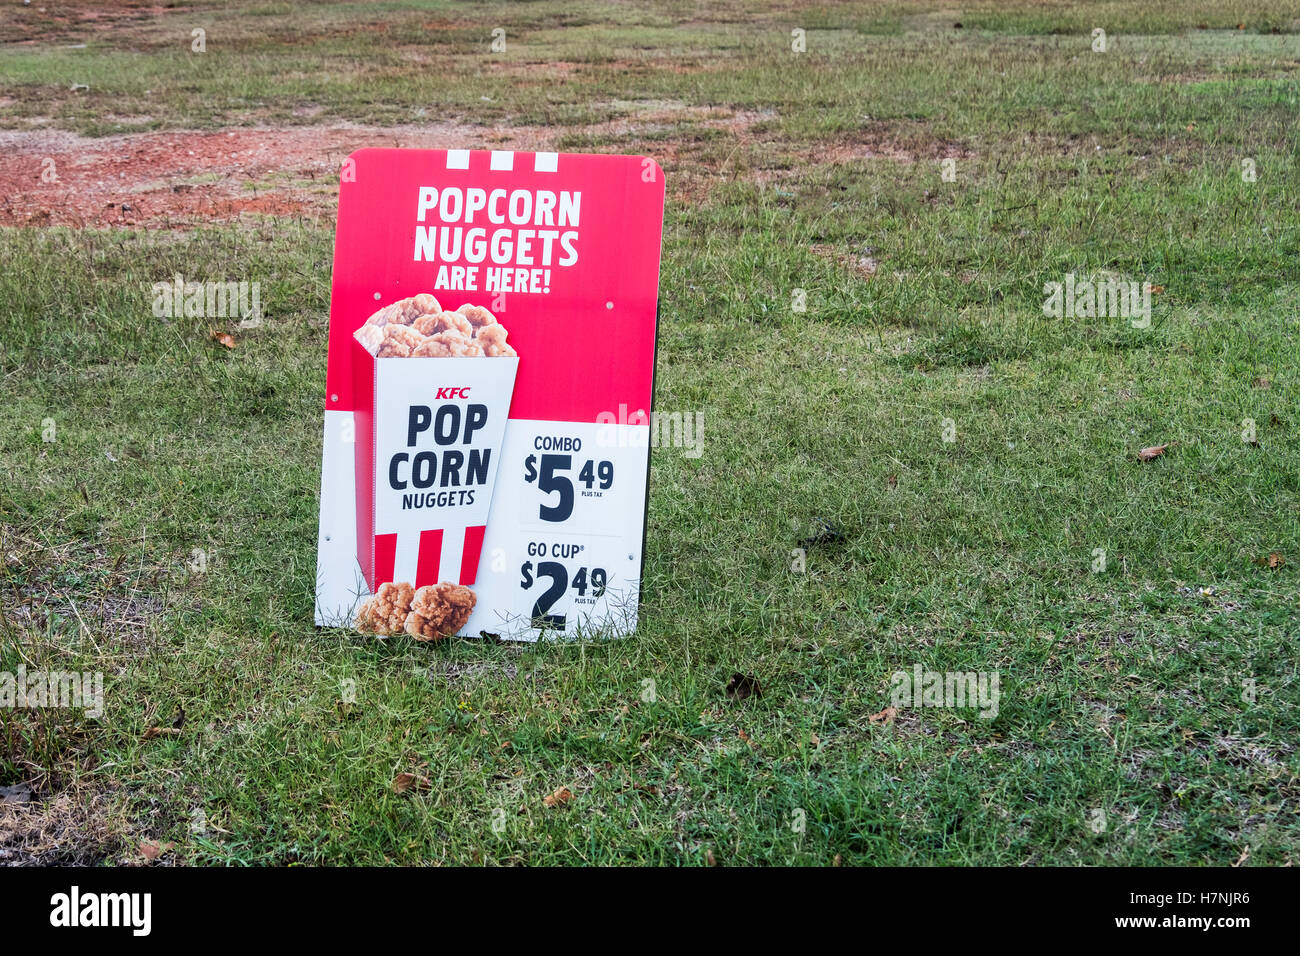 A sign advertising Kentucky Fried Chicken popcorn chicken nuggets in Purcell, Oklahoma, USA. Stock Photo